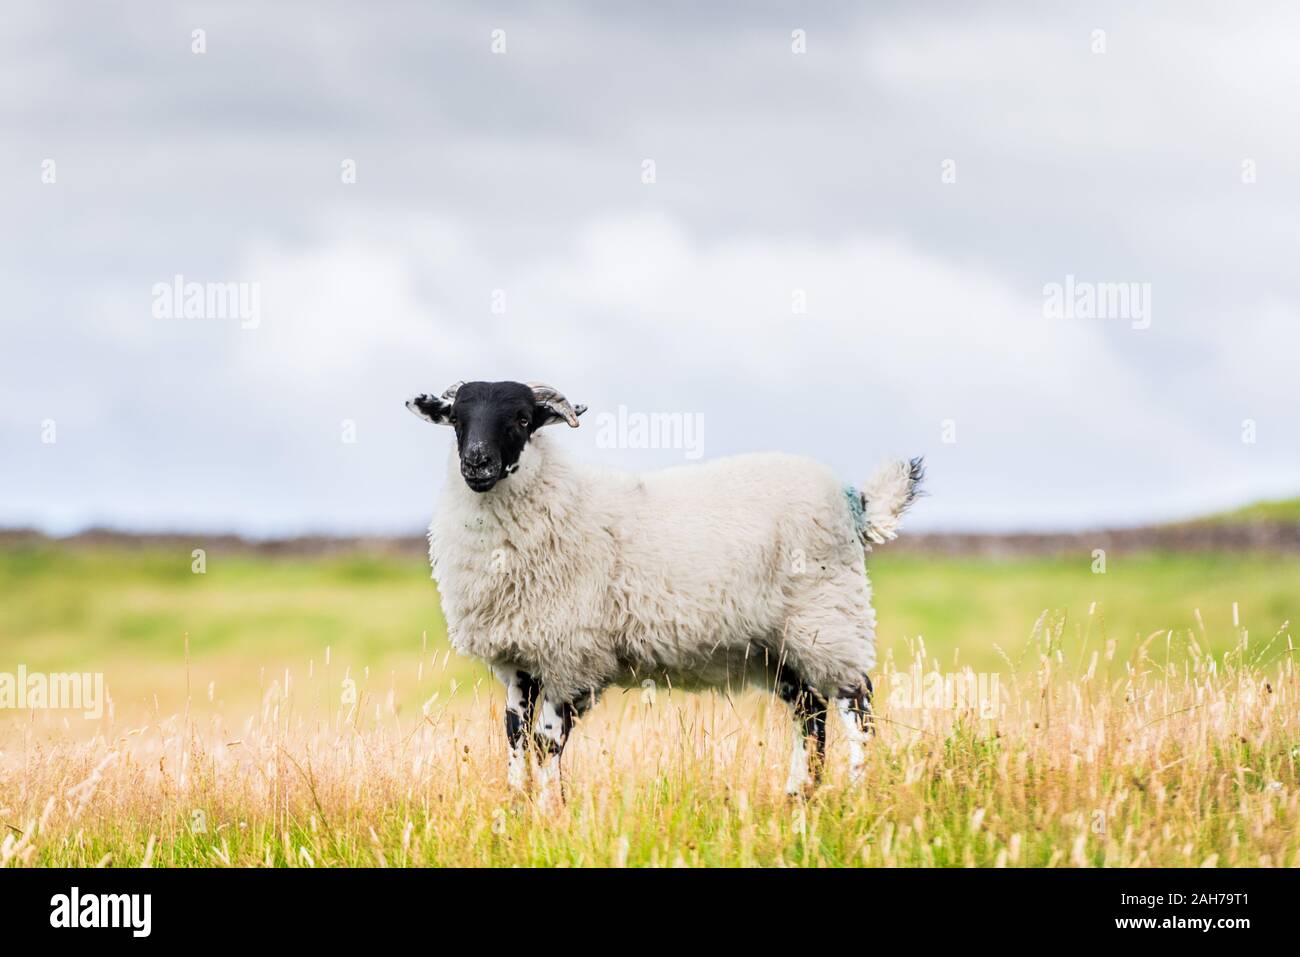 A scottish blackface sheep is standing in a pasture under a cloudy sky Stock Photo